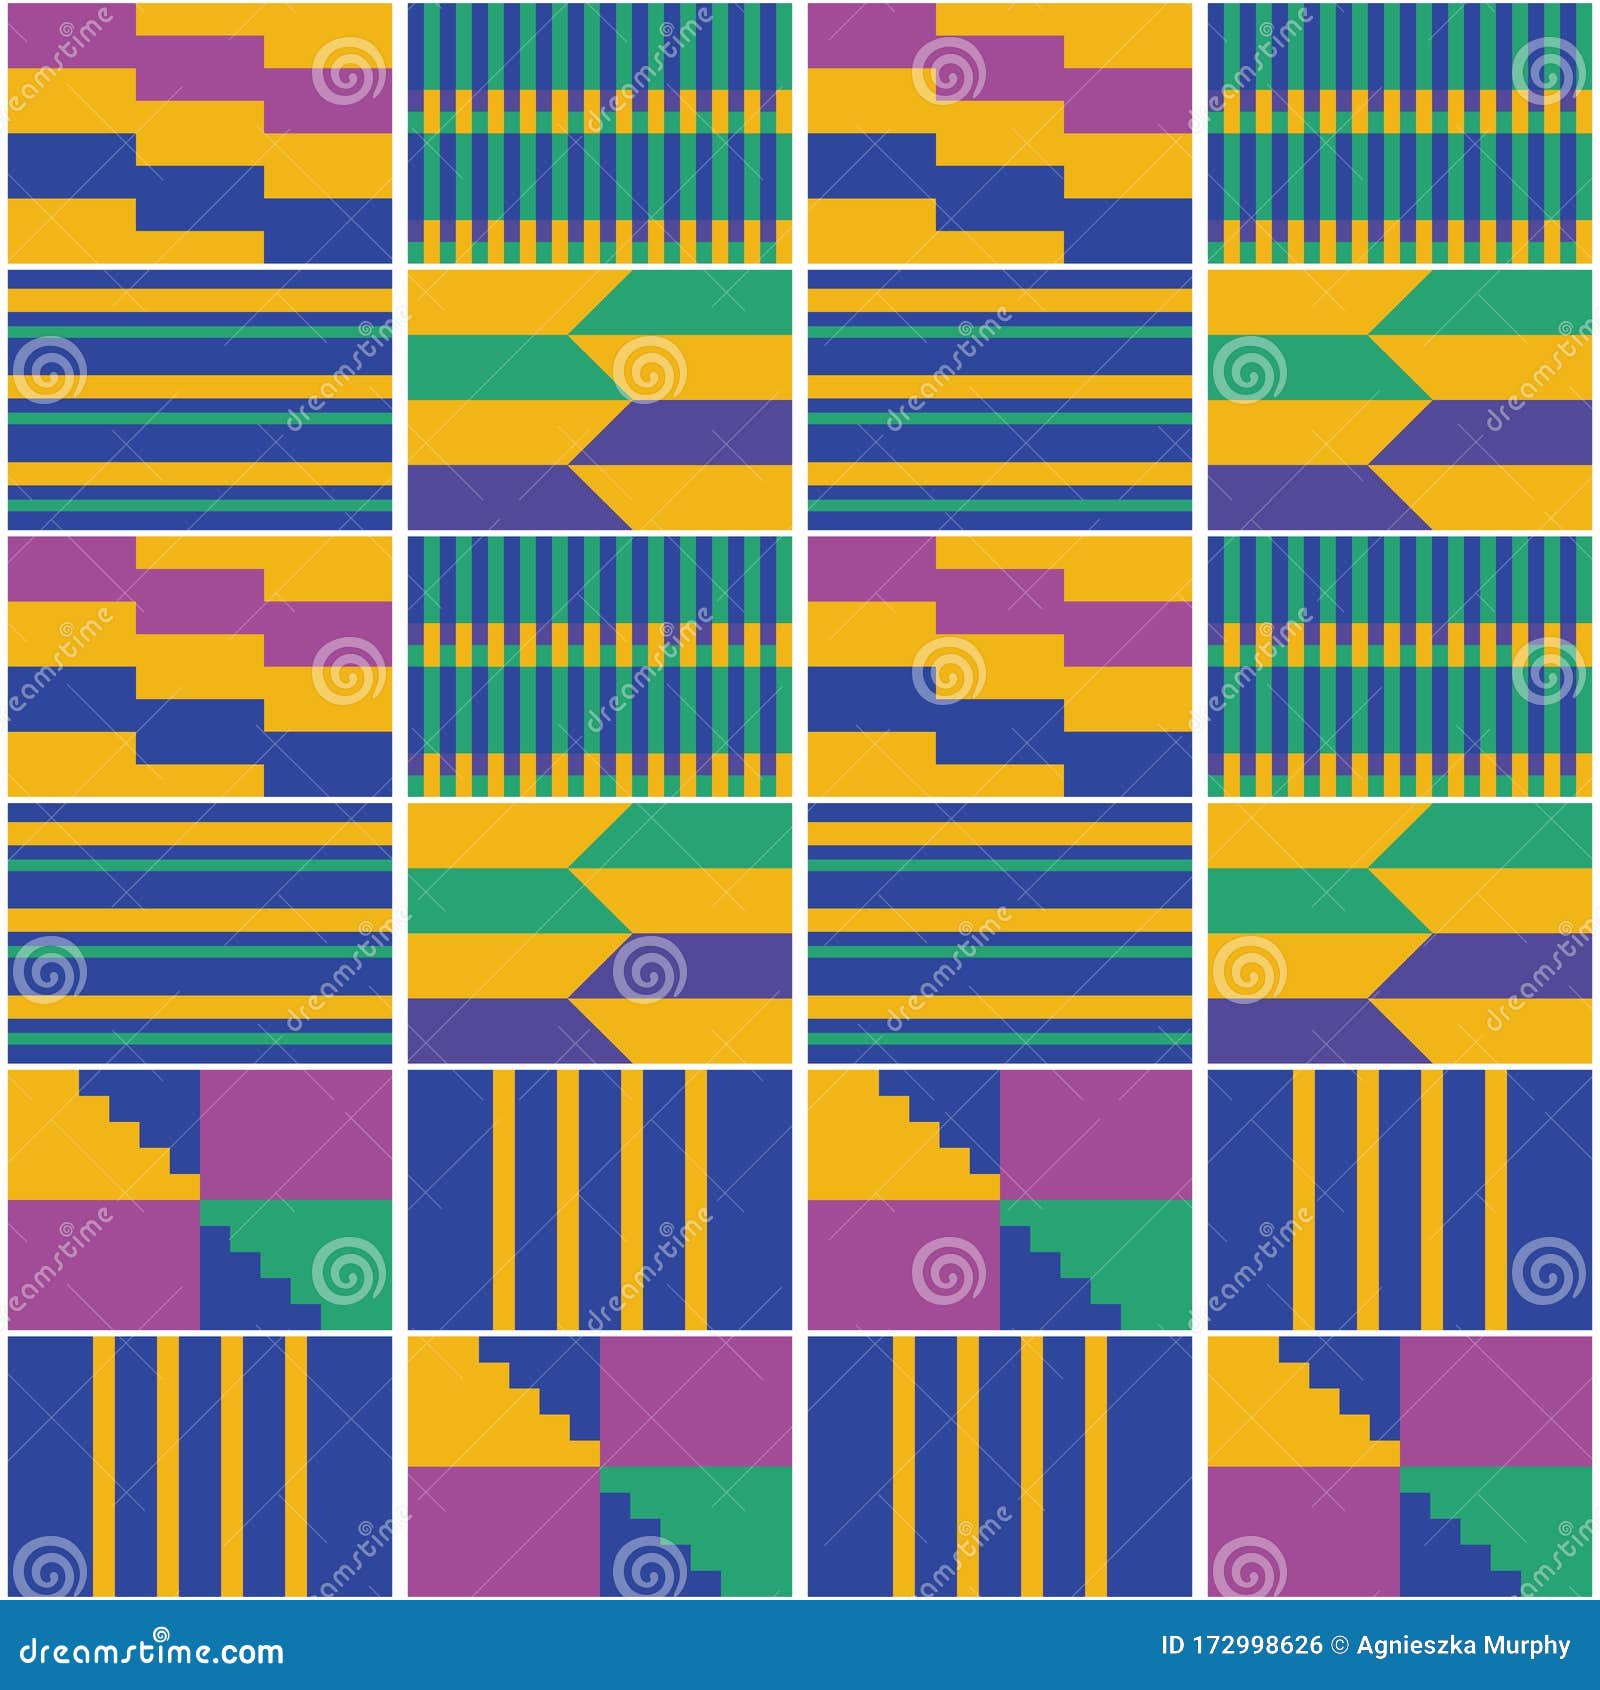 African Geometric Kente Cloth Style Vector Seamless Textile